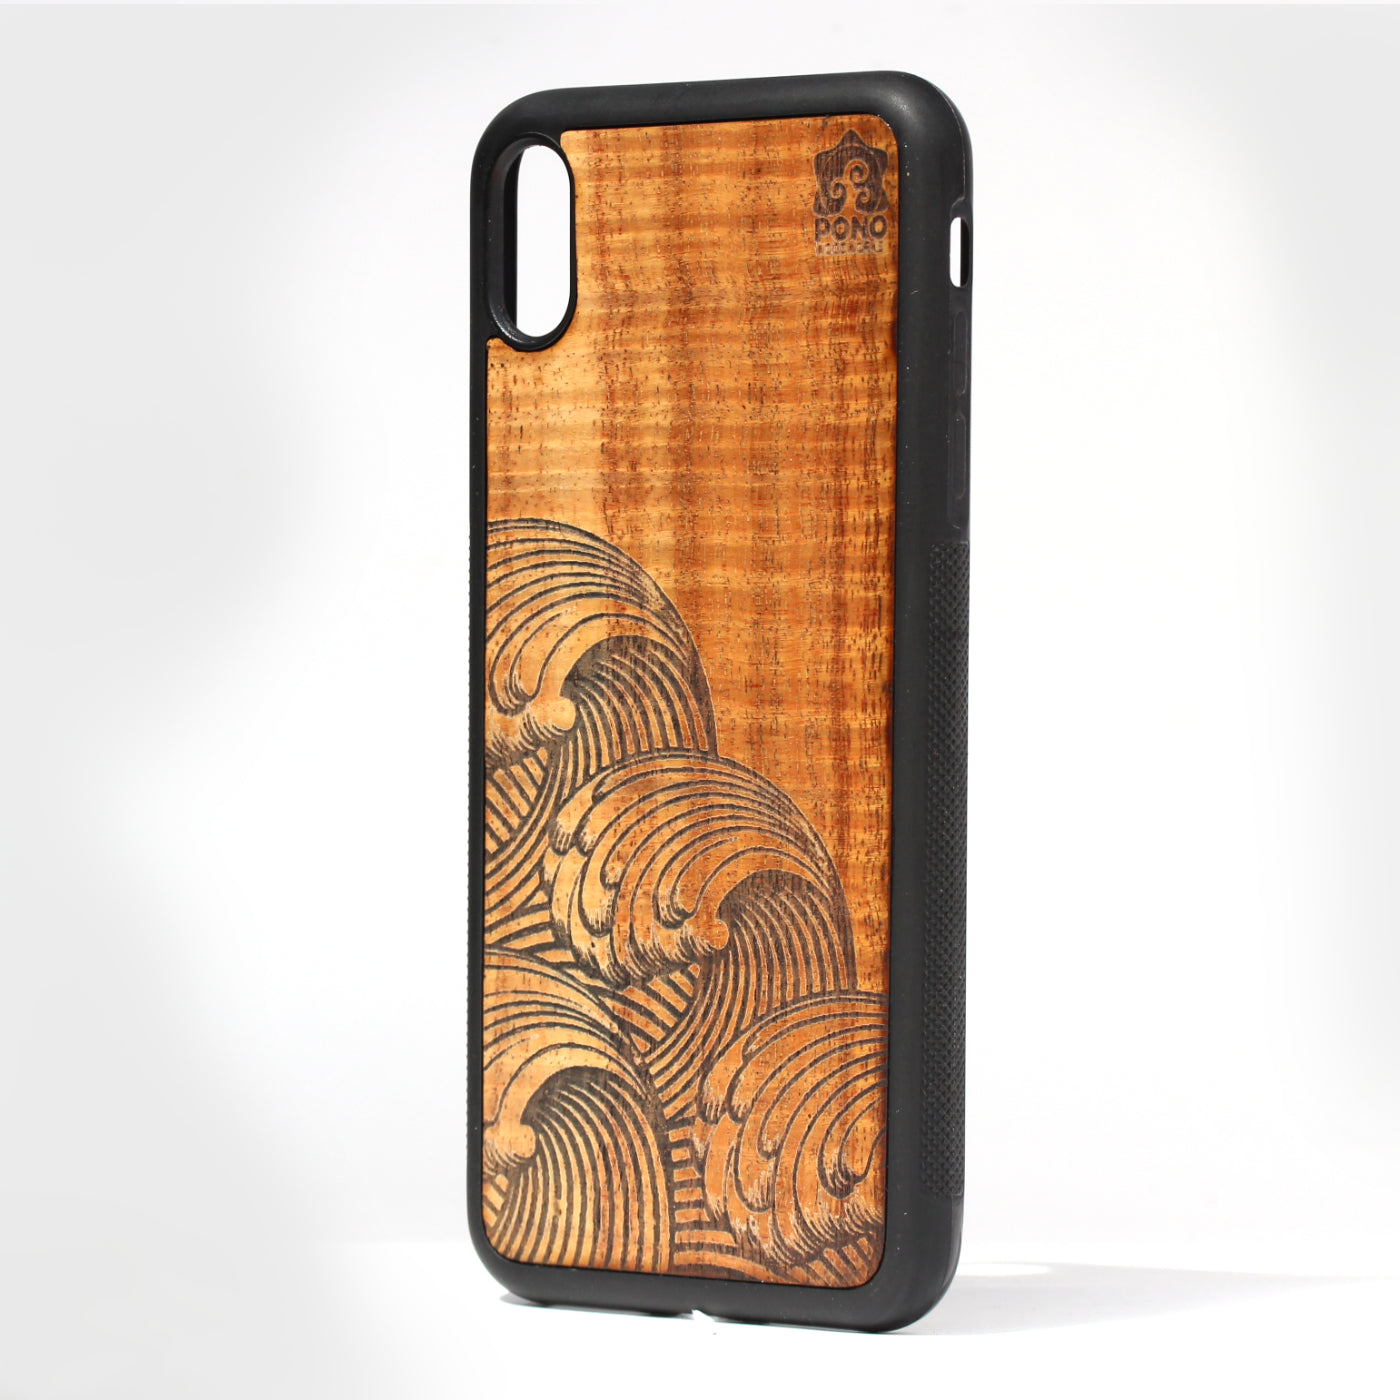 exquisite curly koa wood inlay phone case standing upright showing a Japanese Wave design laser etched into the wood